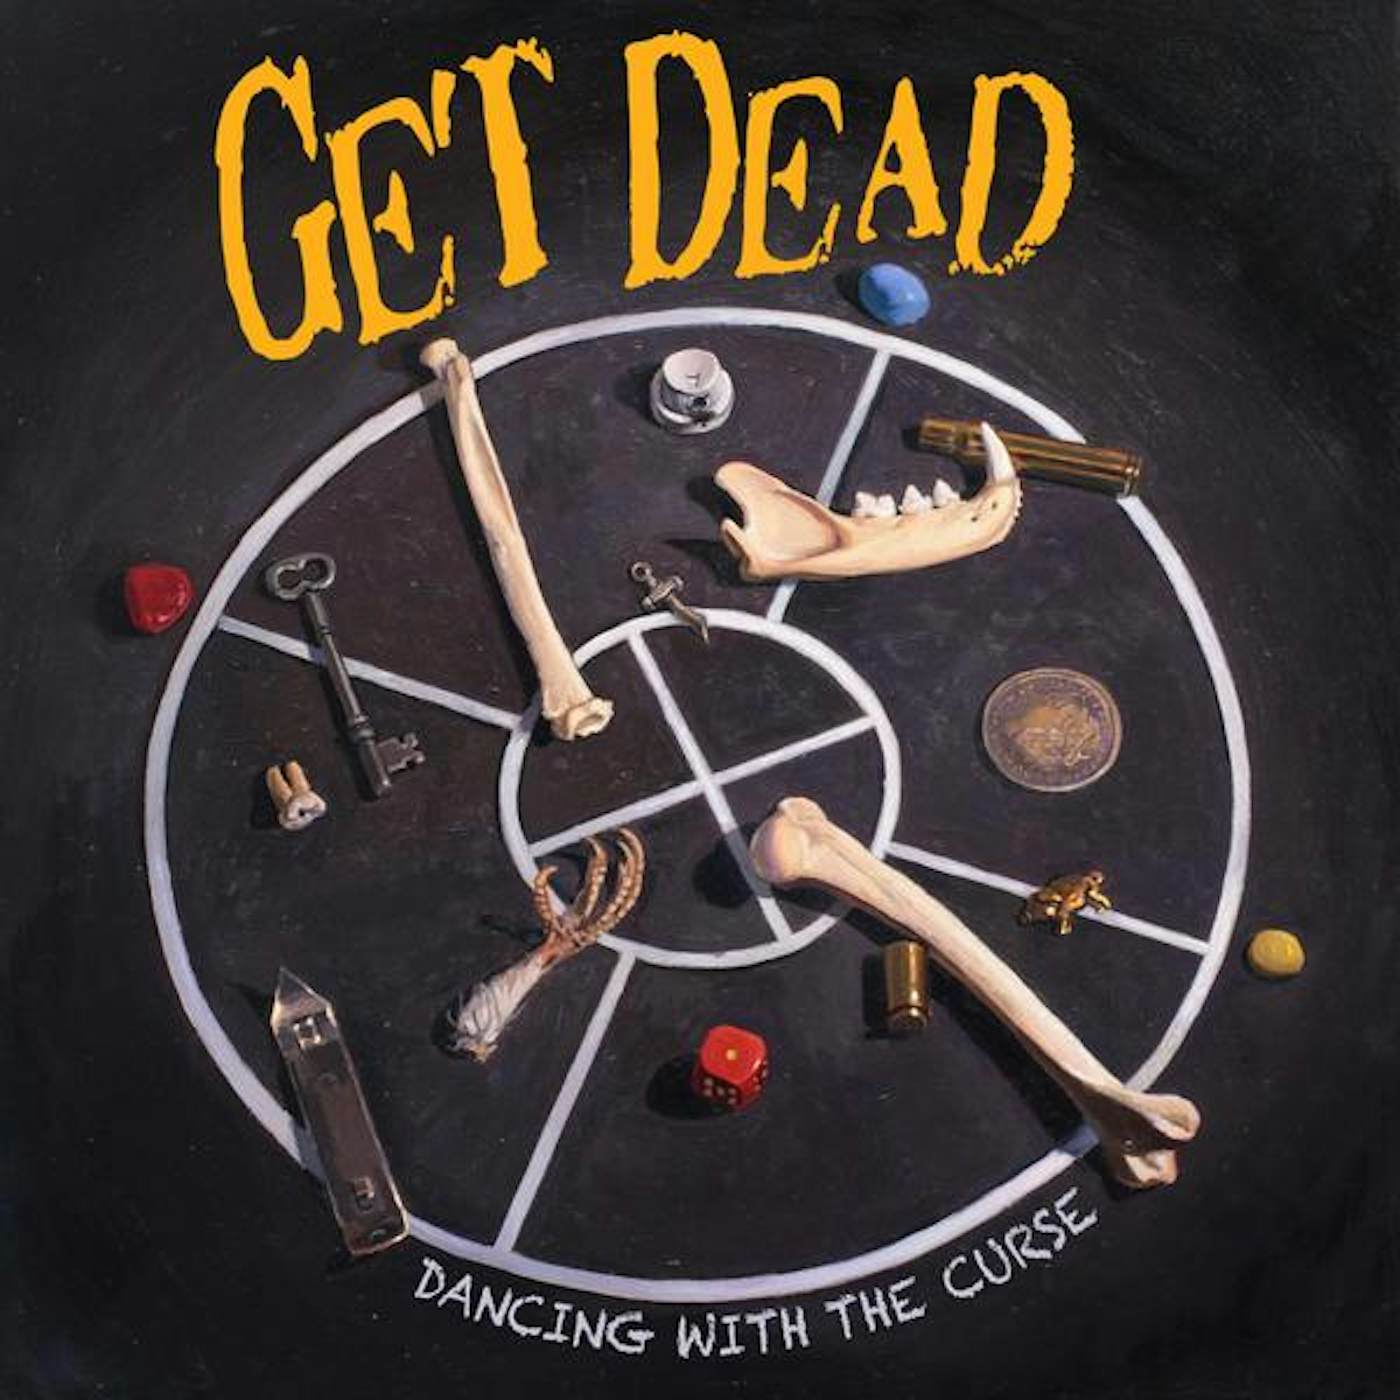 Get Dead Dancing with the Curse Vinyl Record